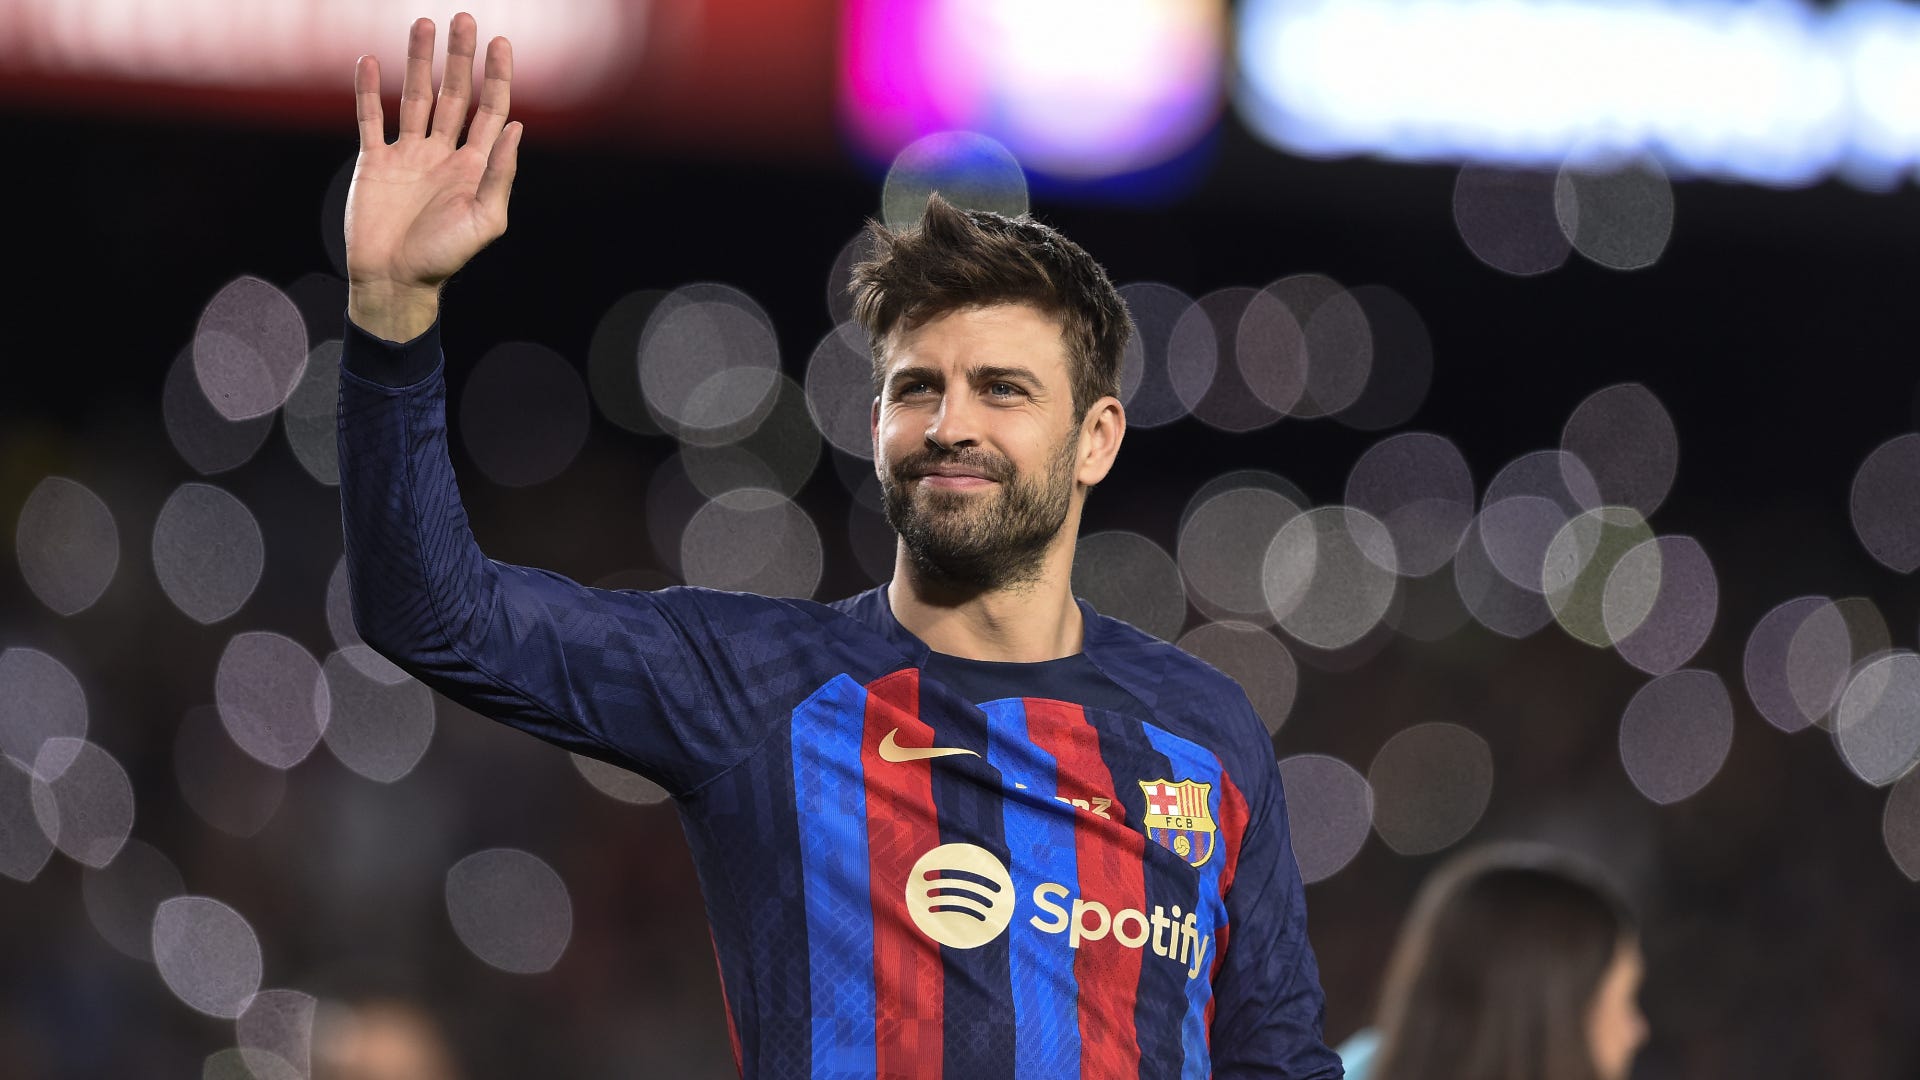 'People want the truth!' - Ex-Barcelona star Gerard Pique slams the Blaugrana over financial predicament & demands answers if they 'don't have the money to be competitive'